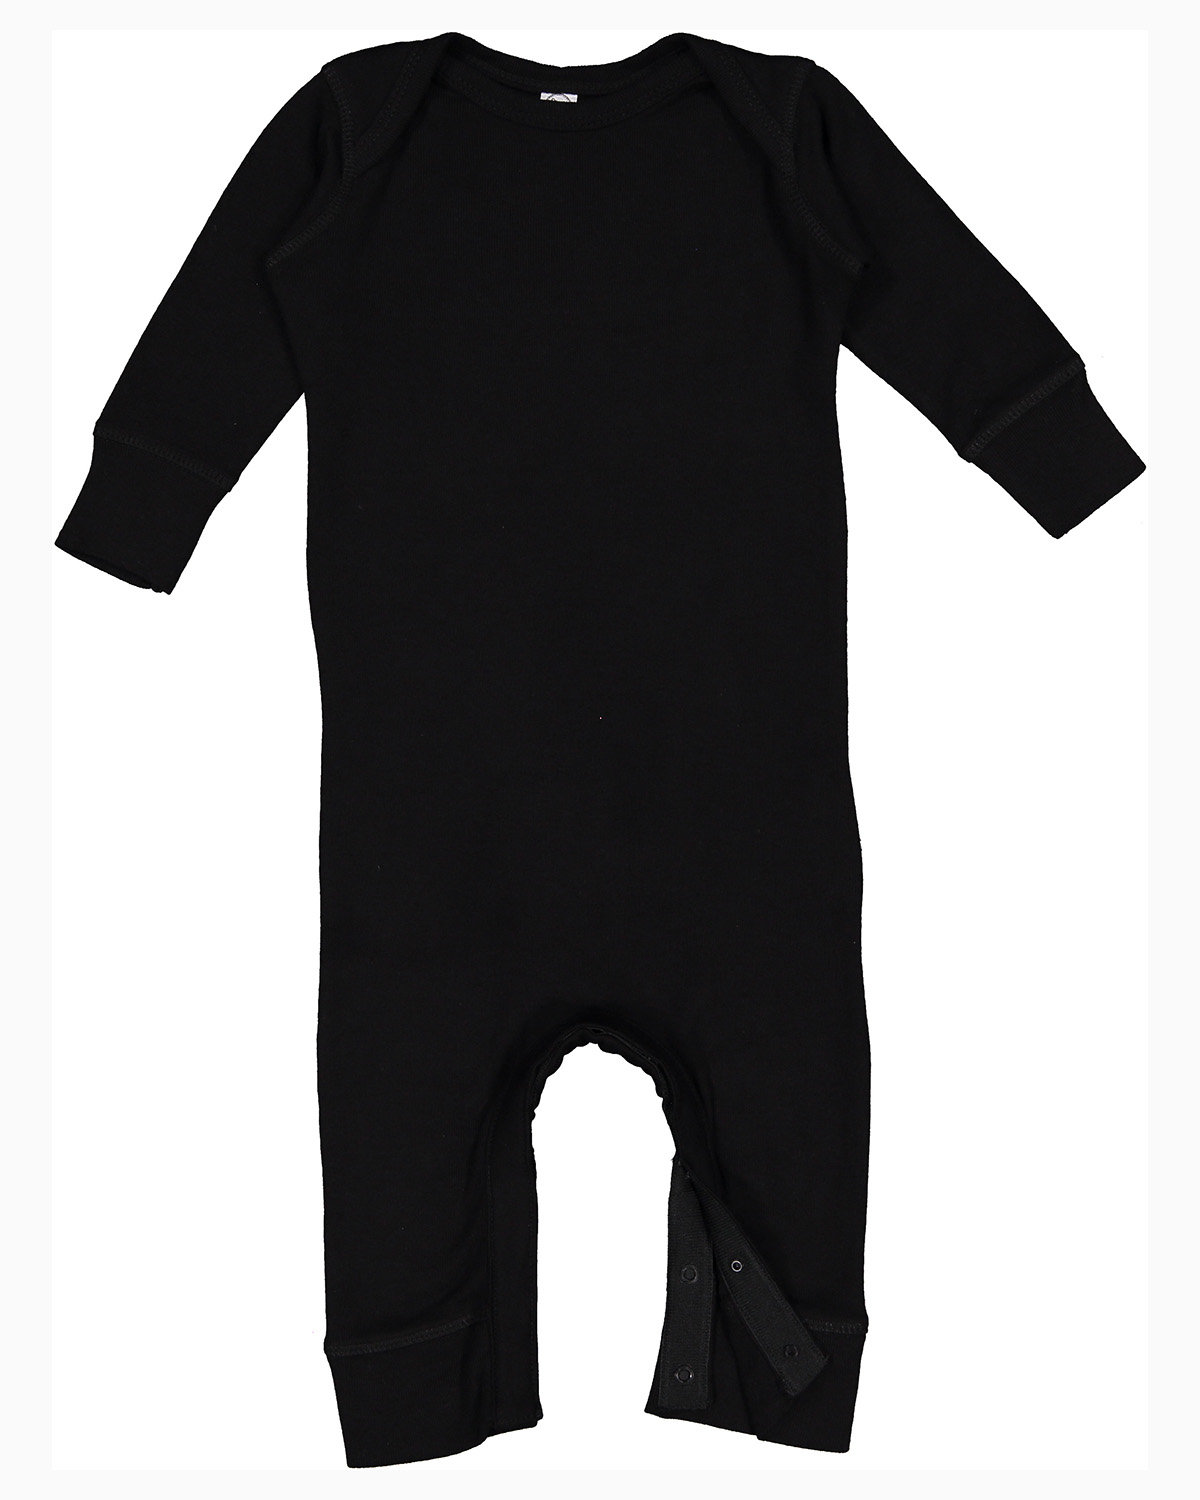 Rabbit Skins Infant Baby Rib Coverall | alphabroder